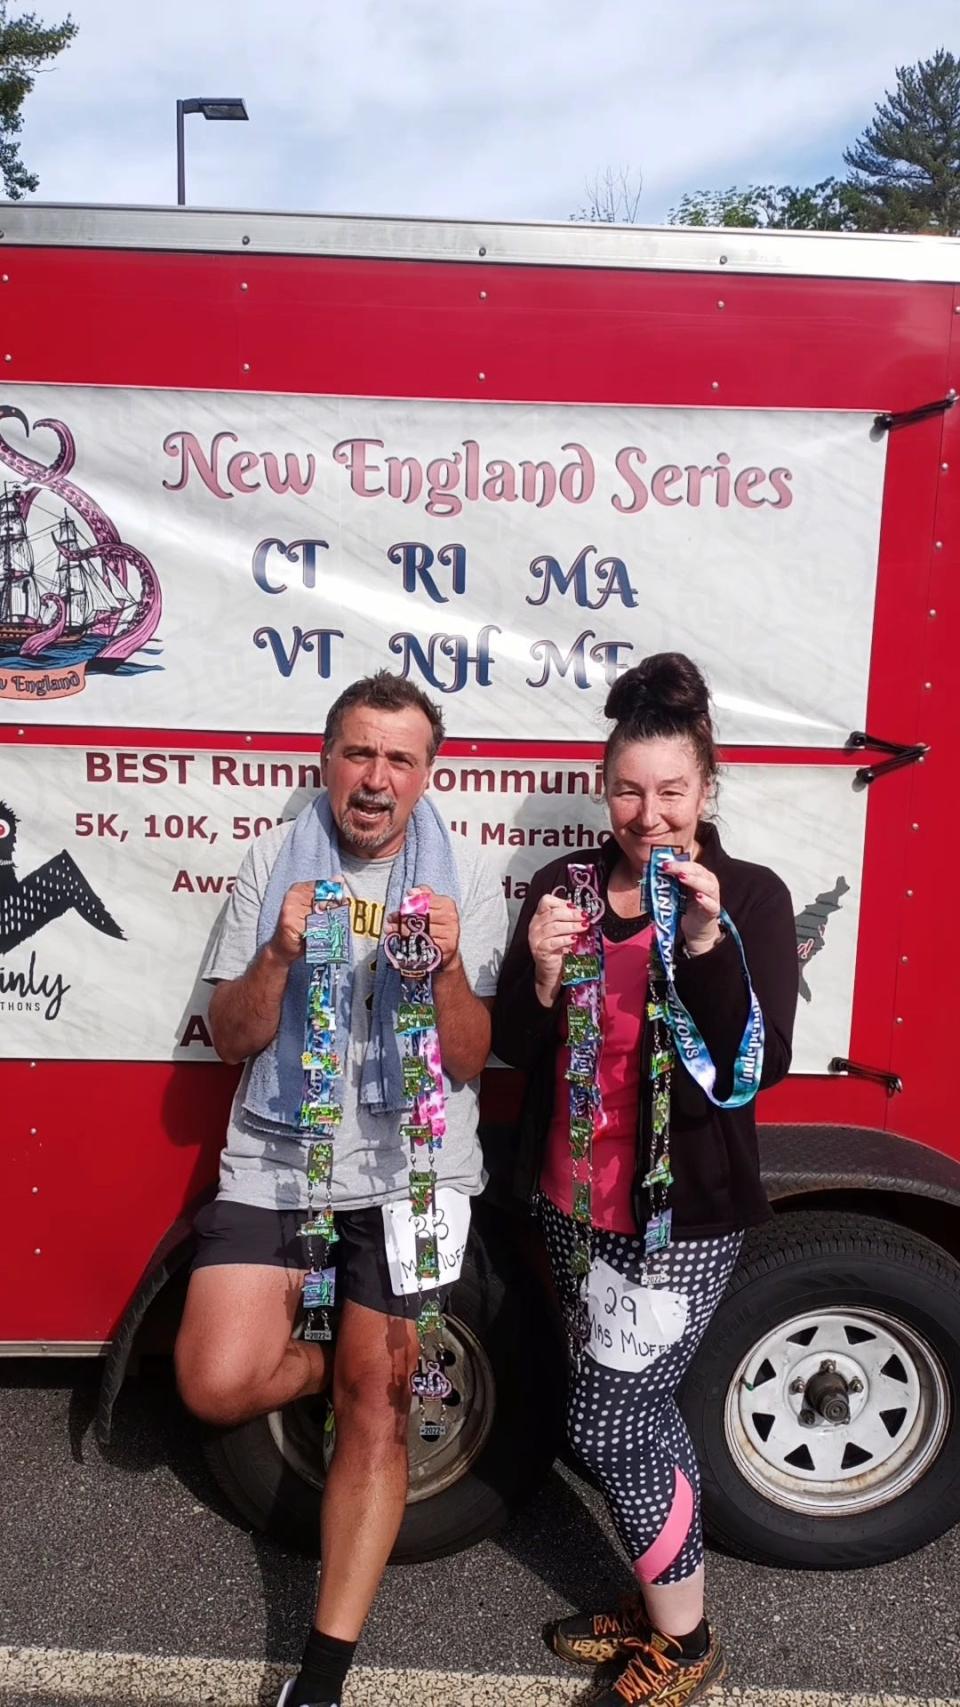 Ann Sylvia and Robert Cordeiro of New Bedford stand at the finish line of a half marathon in Sanford, Maine, on Saturday, June 11. It was the couple's last stop on their record-setting run of 11 half marathons in 11 different states, and completed in as many days. Now, they await a response from Guinness World Records to their submission to have the achievement recognized.